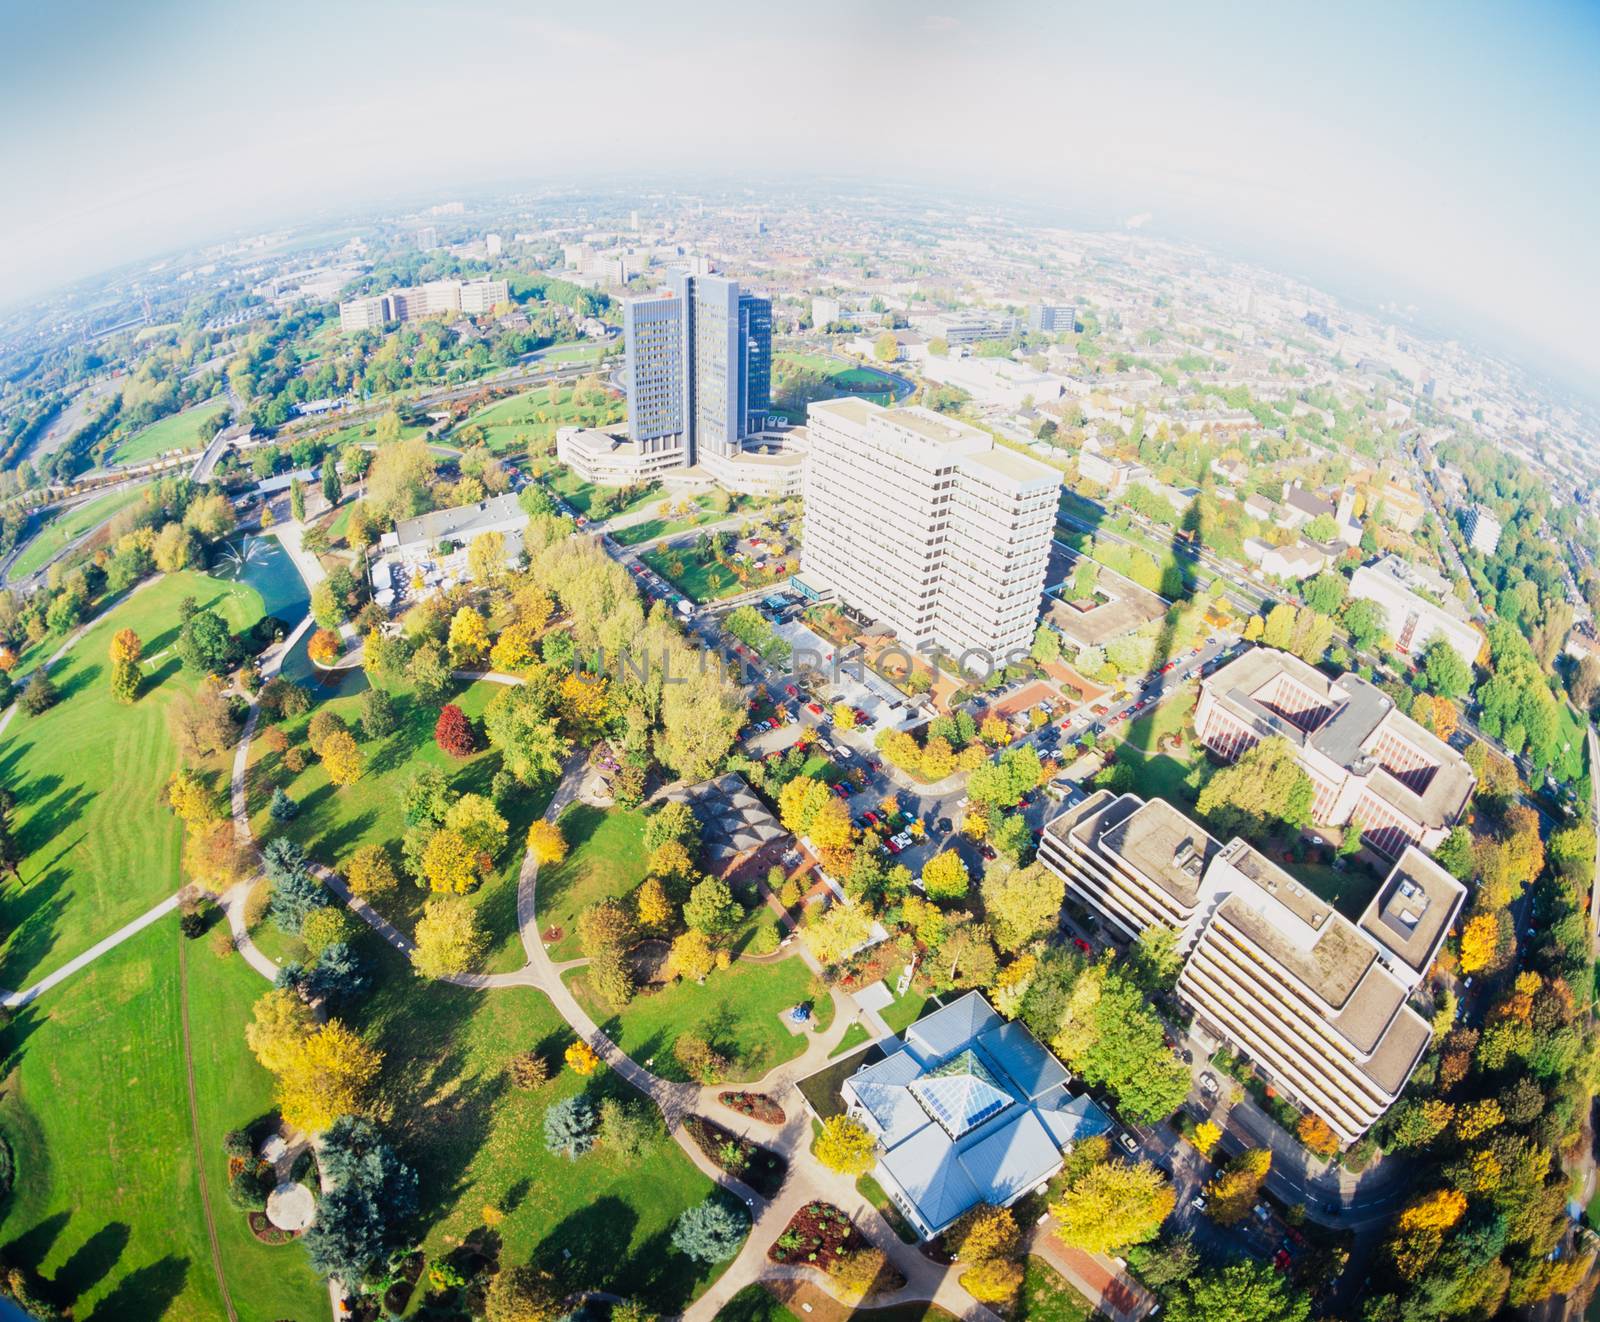 Fall 1992, Fisheye aerial view of Dortmund, Germany, Europe, cityscape from "Florian" or "Florian tower", Dortmund's TV tower in Westphalia Park (Westfalenpark)